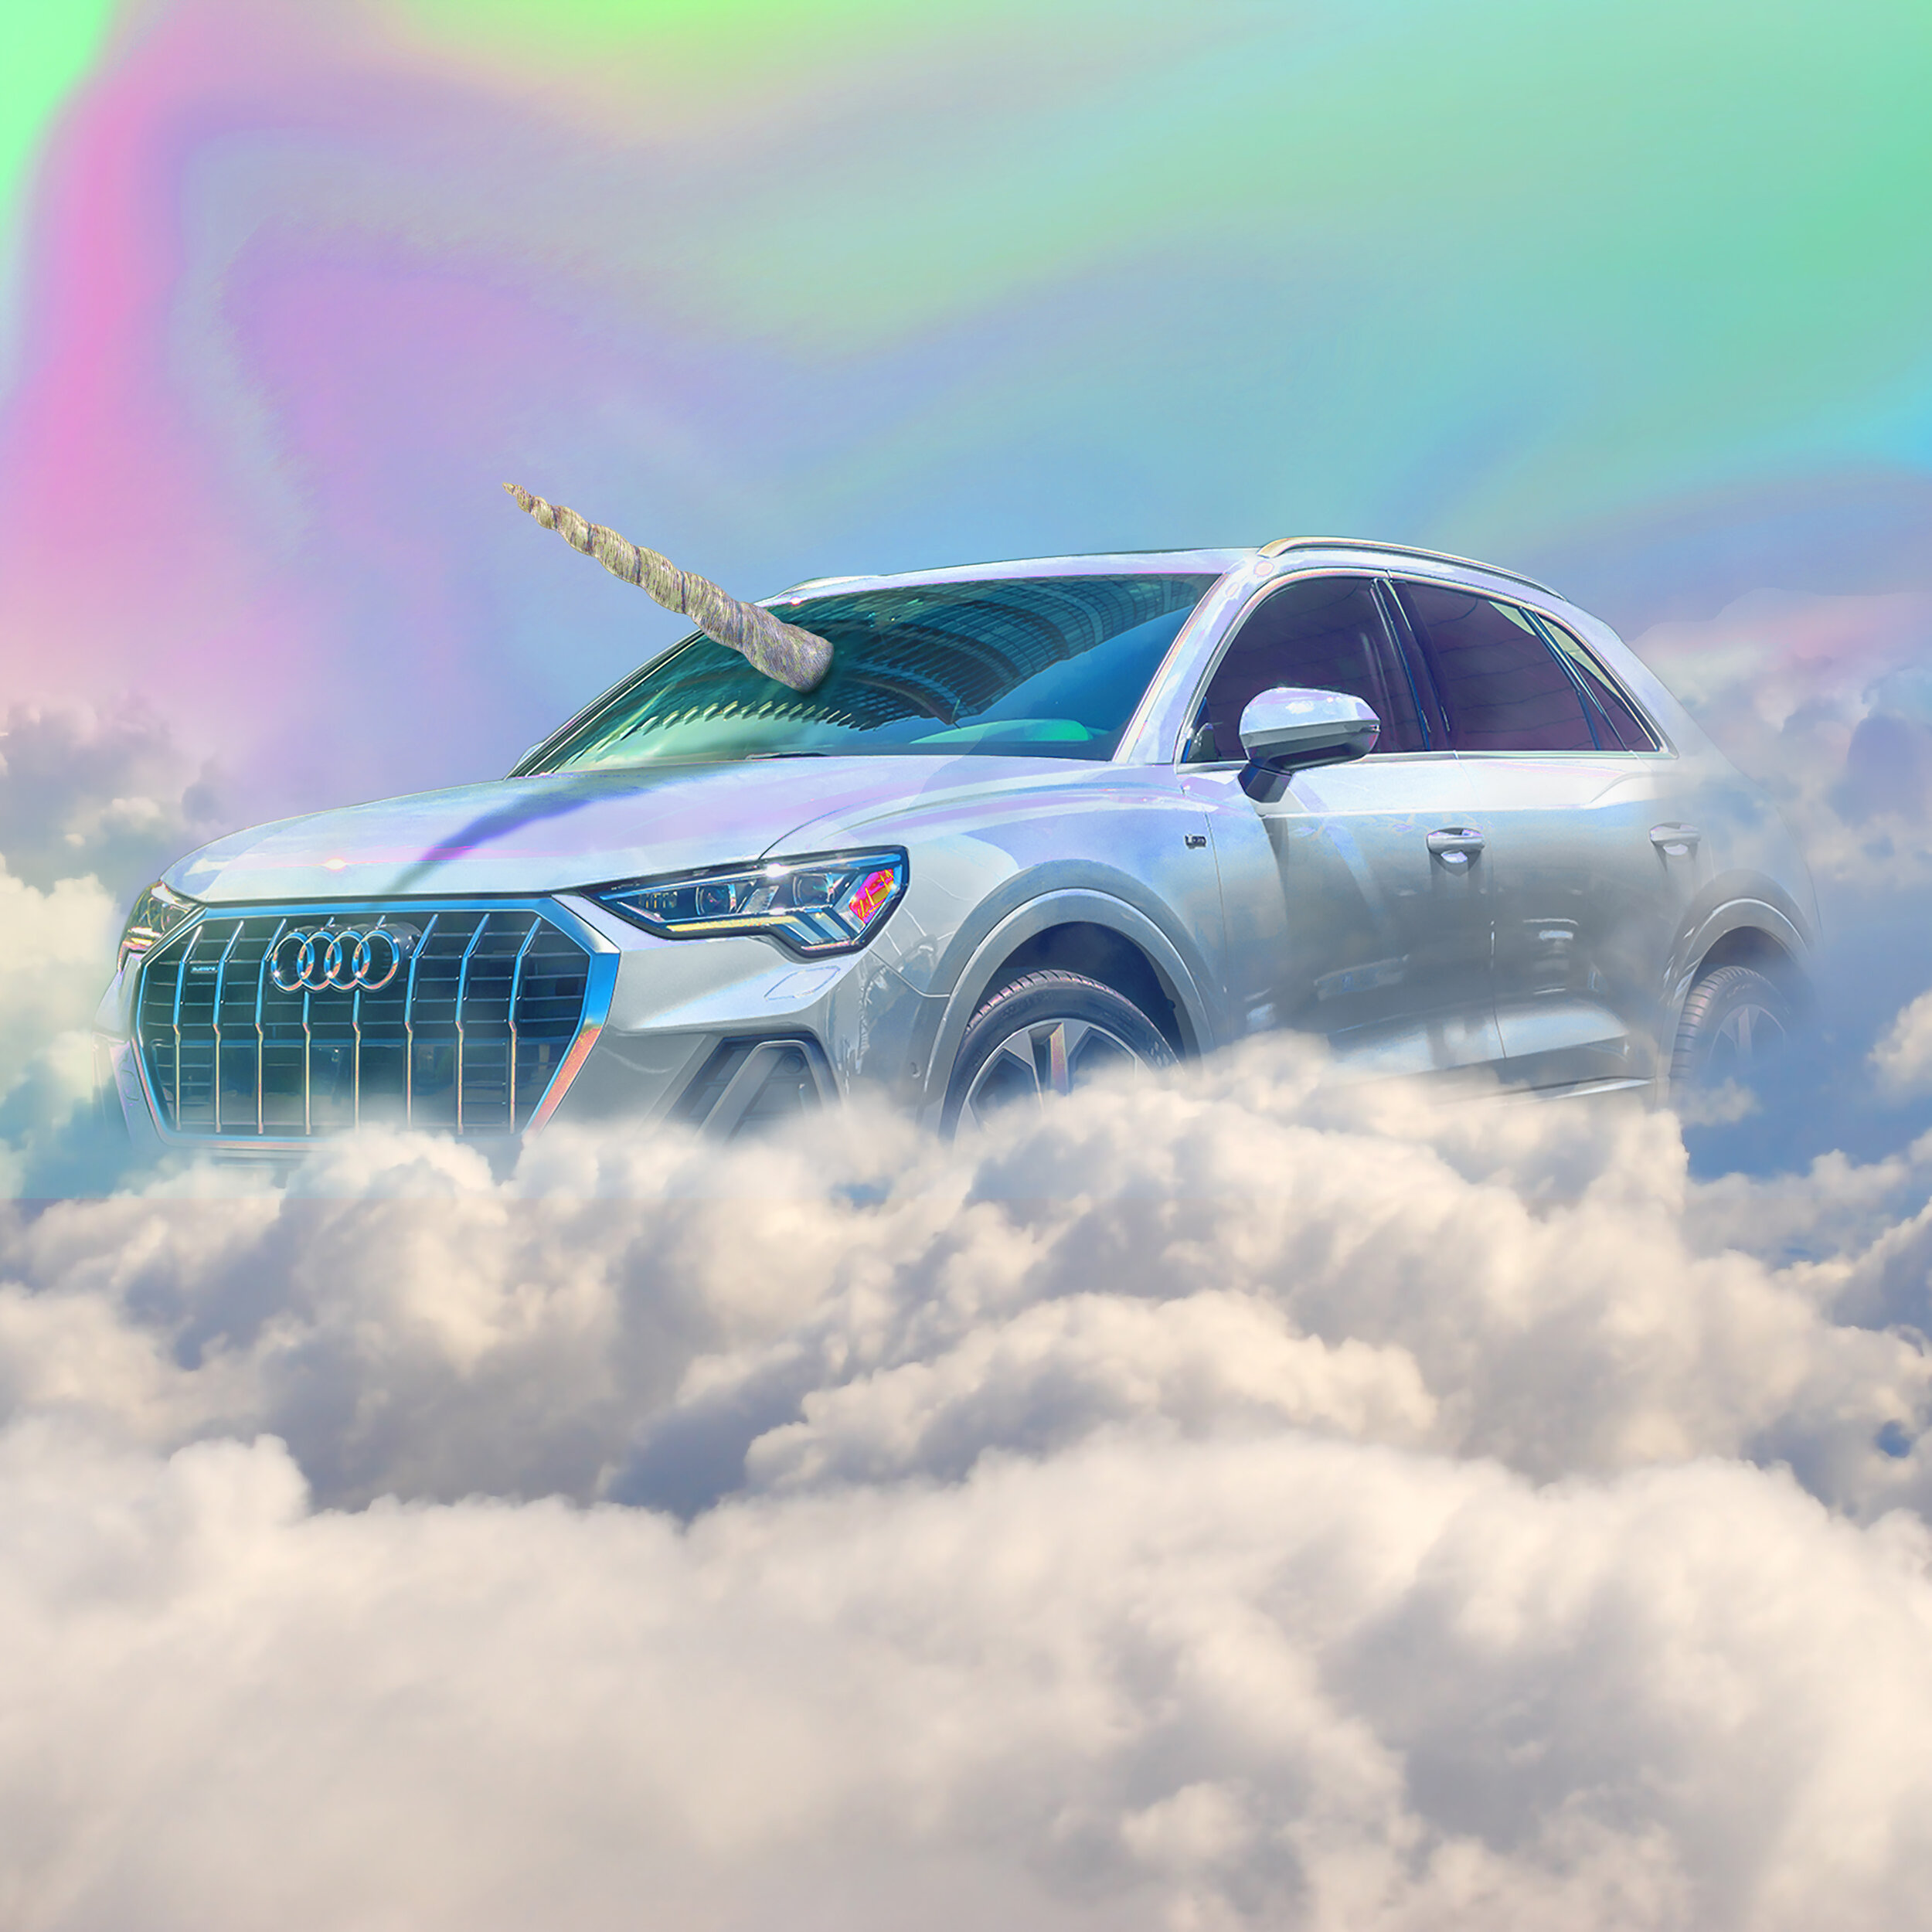 Audi-brings-the-Audi-Q3-unicorn-inspired-social-media-post-to-life-for-those-who-Hold-Nothing-Back-6291.jpg